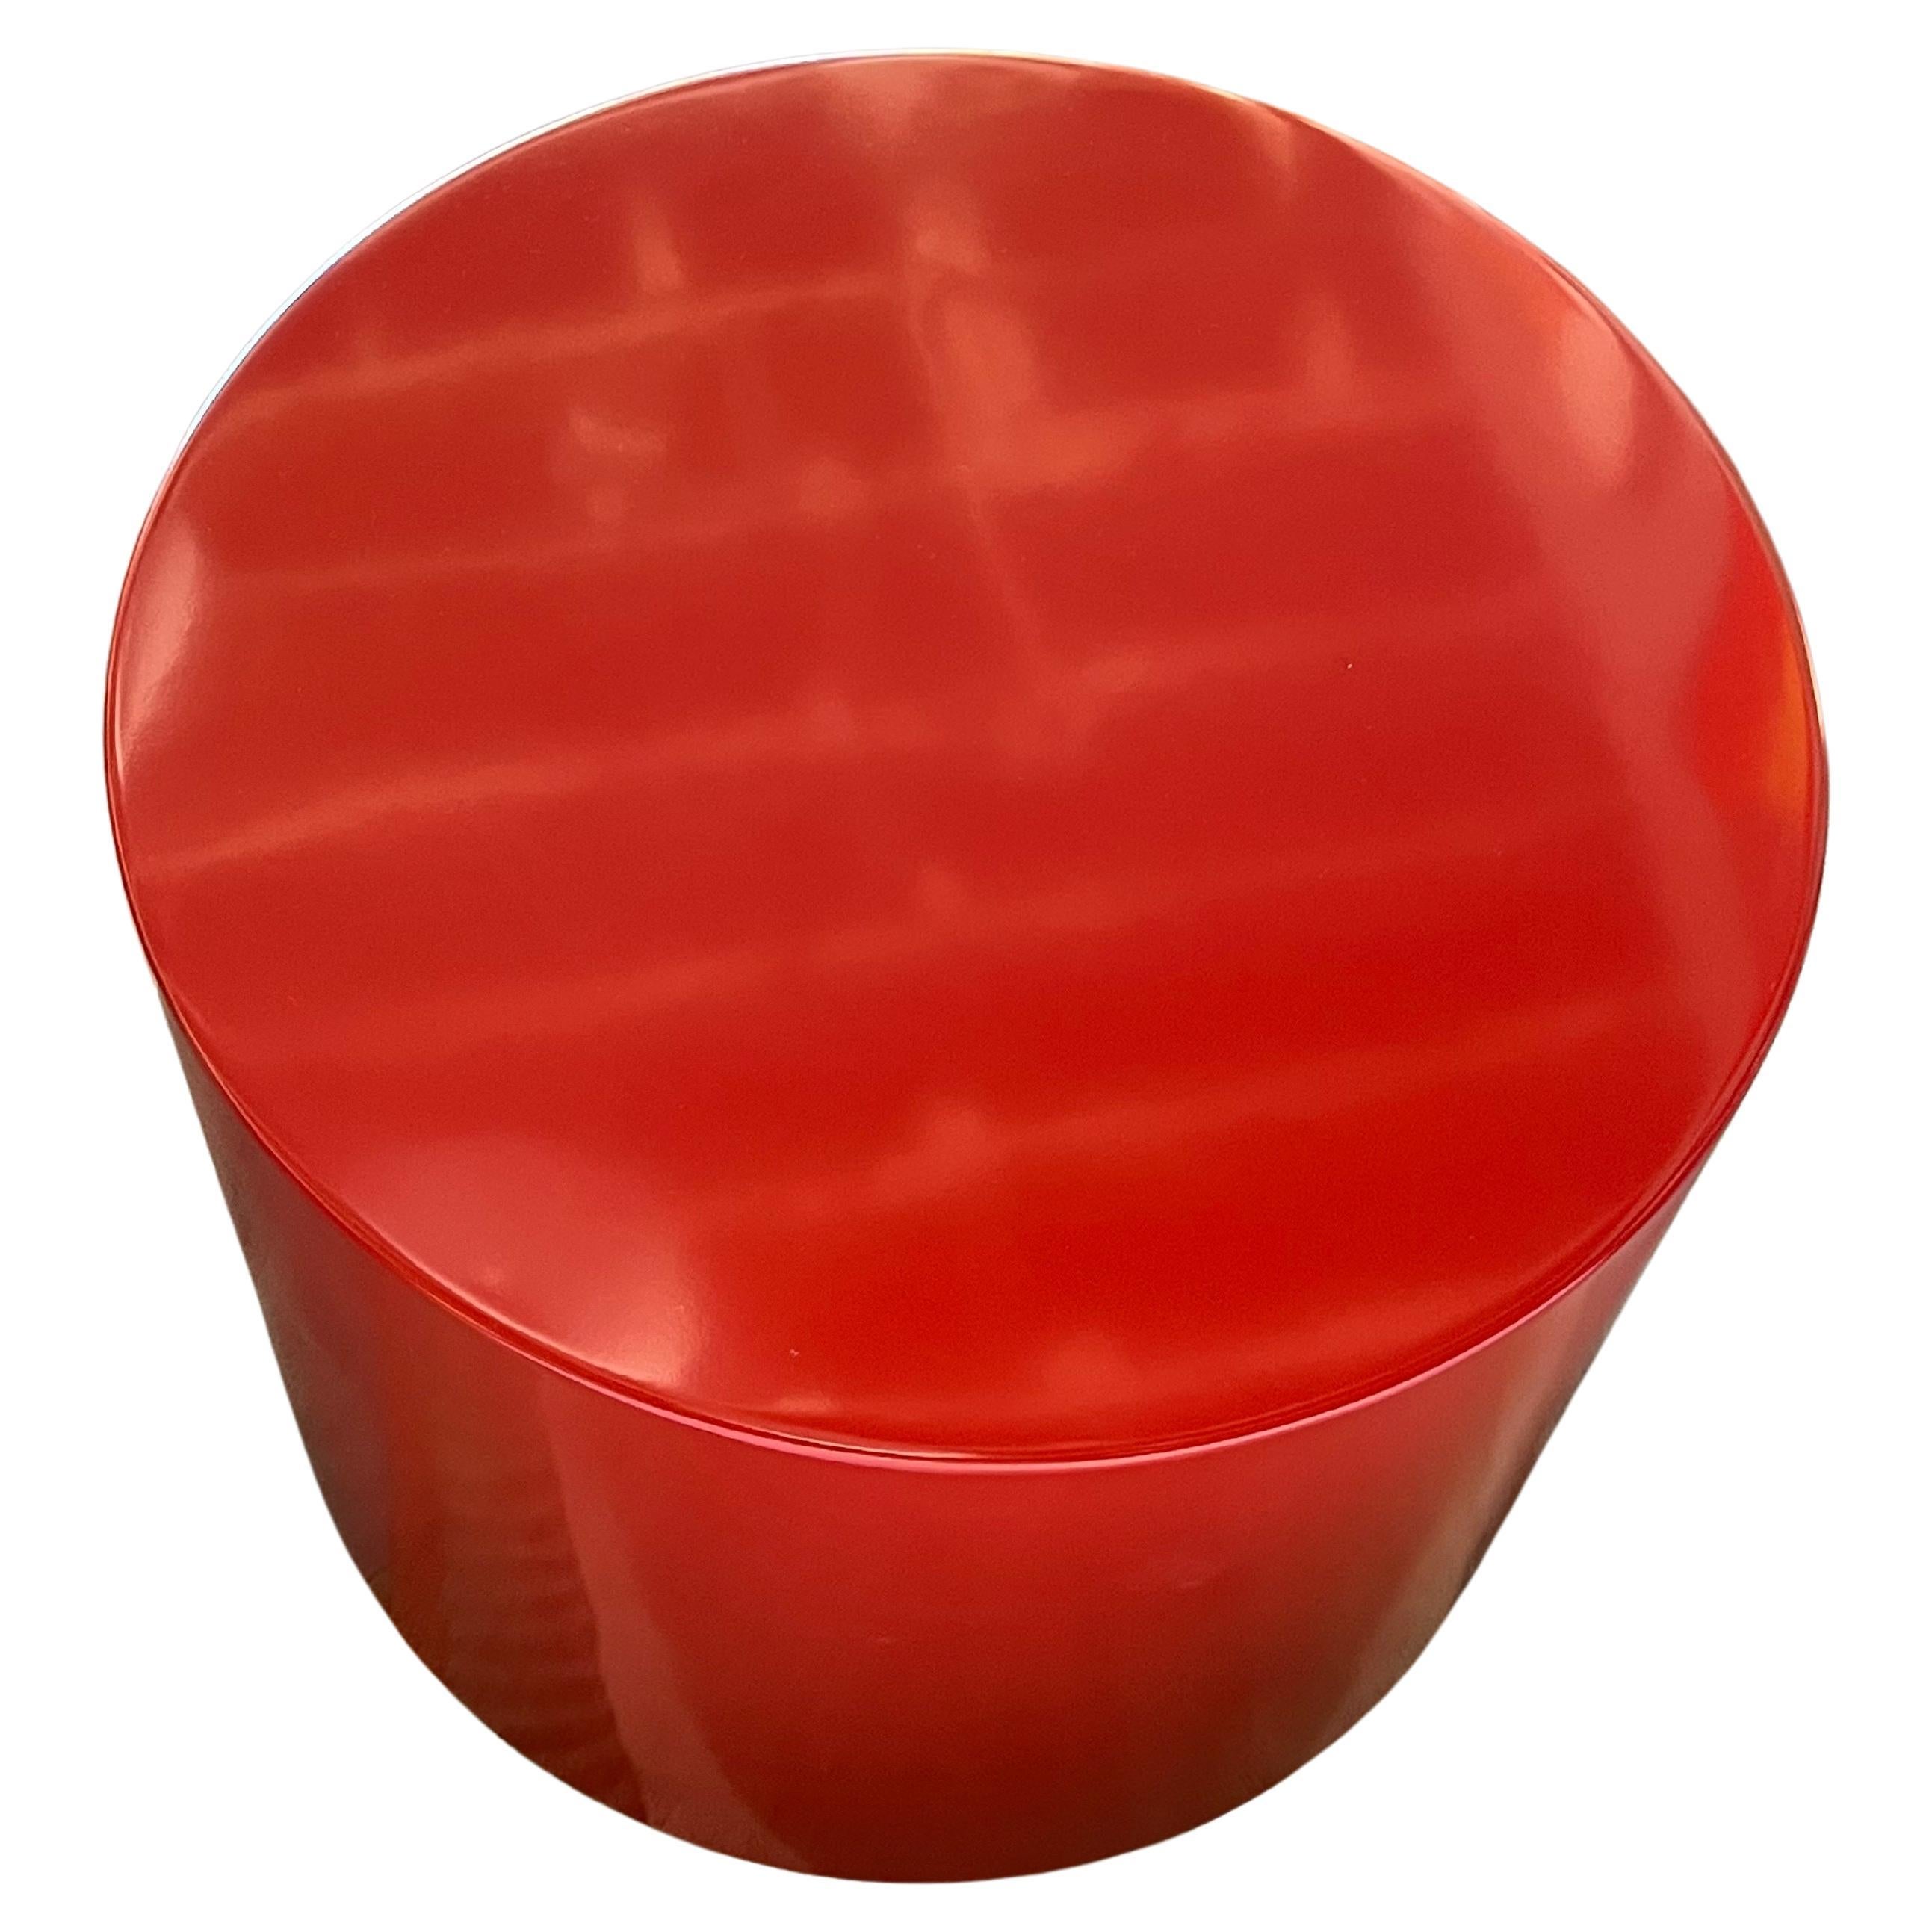 This pedestal is lacquered in a bright crimson red.
It is mounted on a swivel base and can be a very convenient cocktail table or a pedestal for a large sculpture.